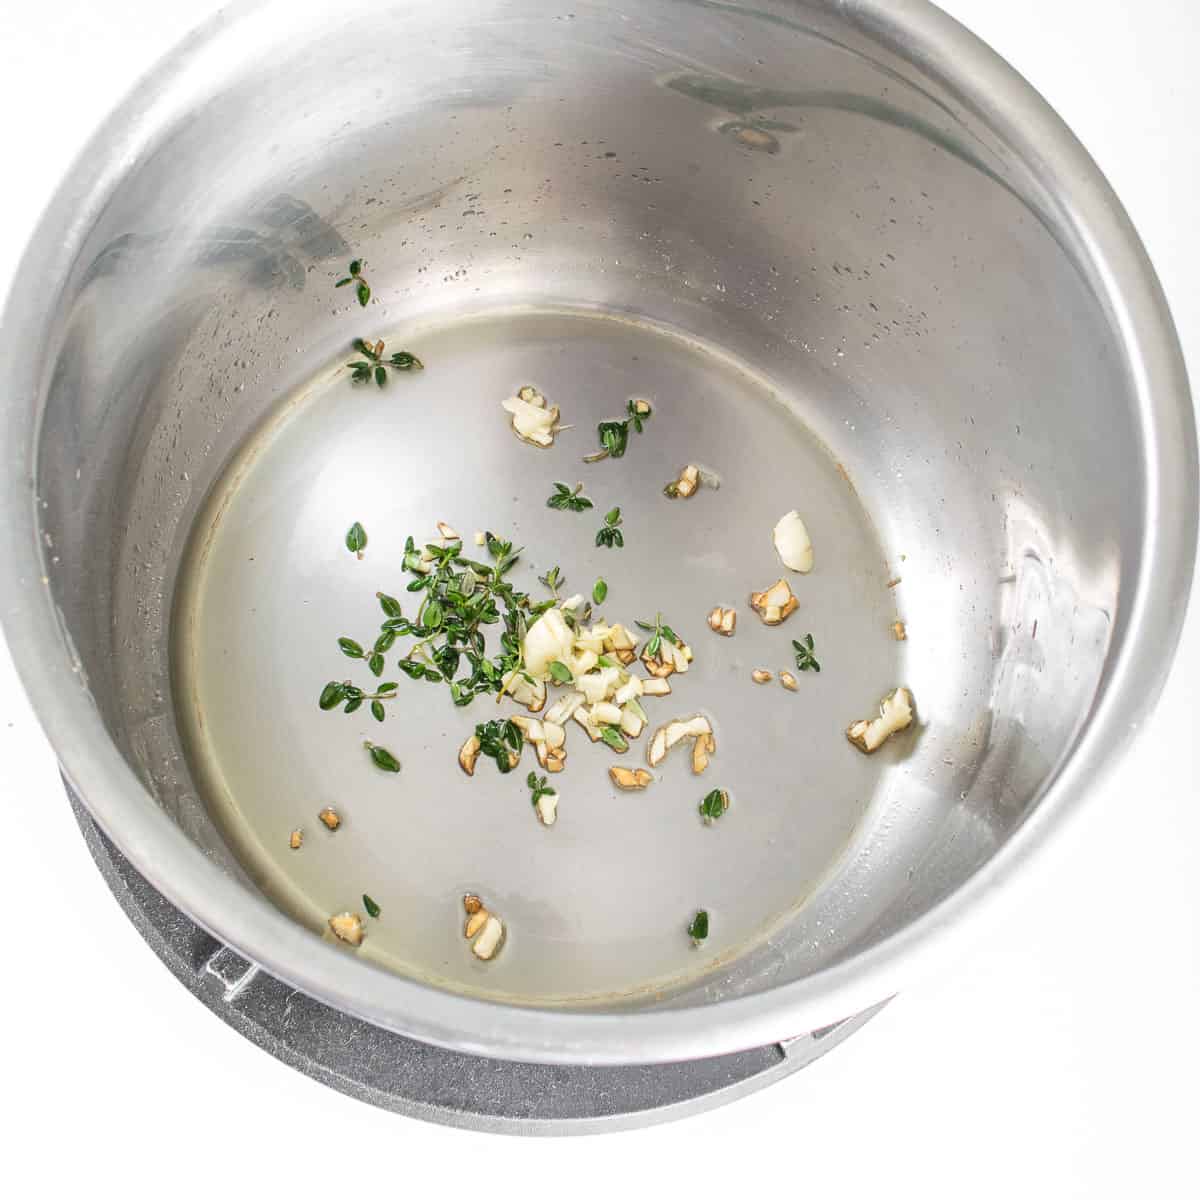 herbs cooked in oil in the instant pot.